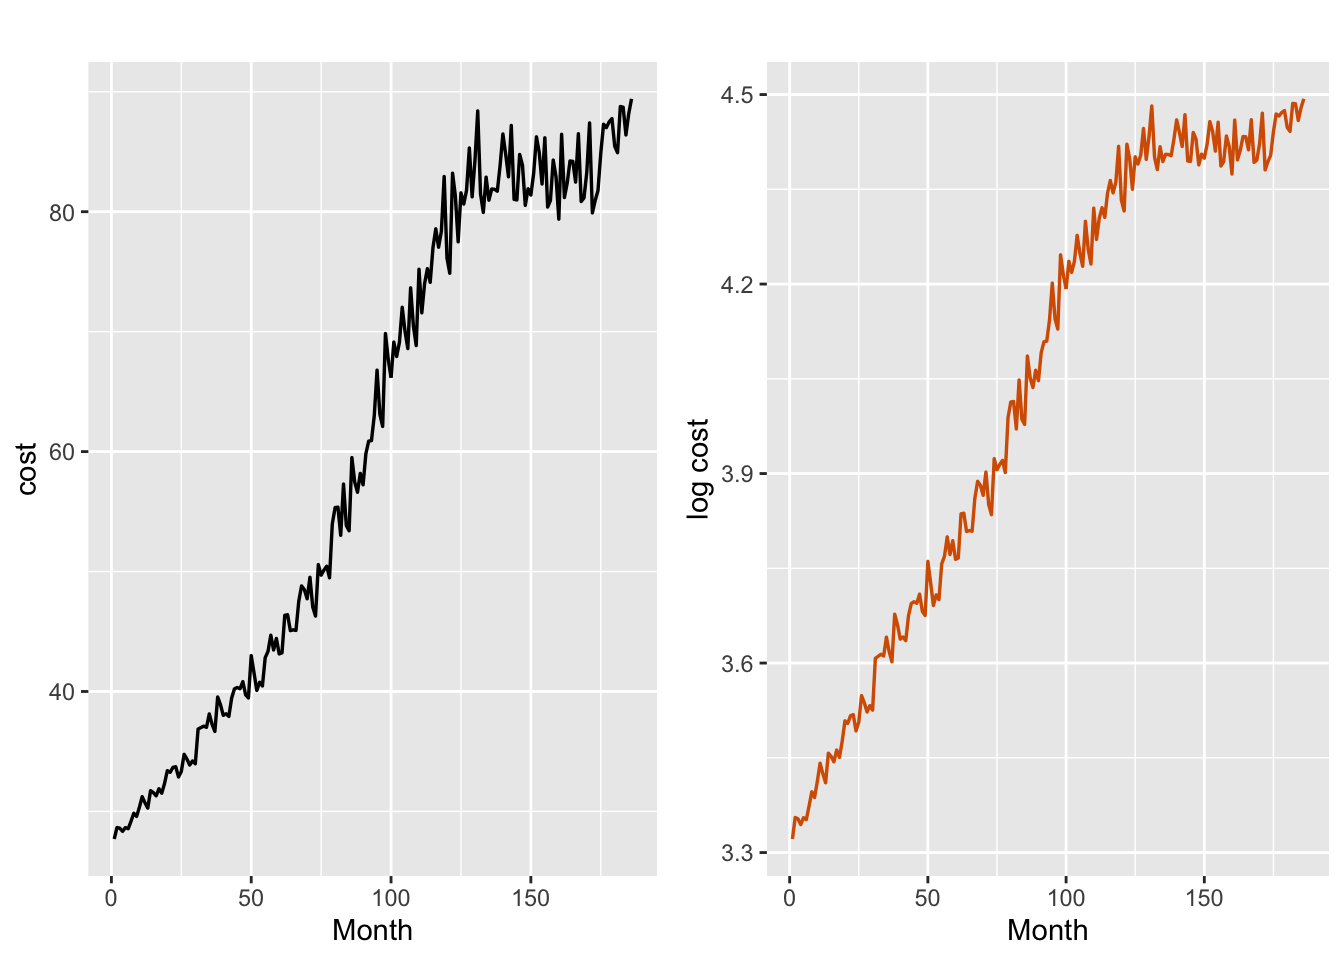 Average monthly cost (left plot) and log cost (right plot).